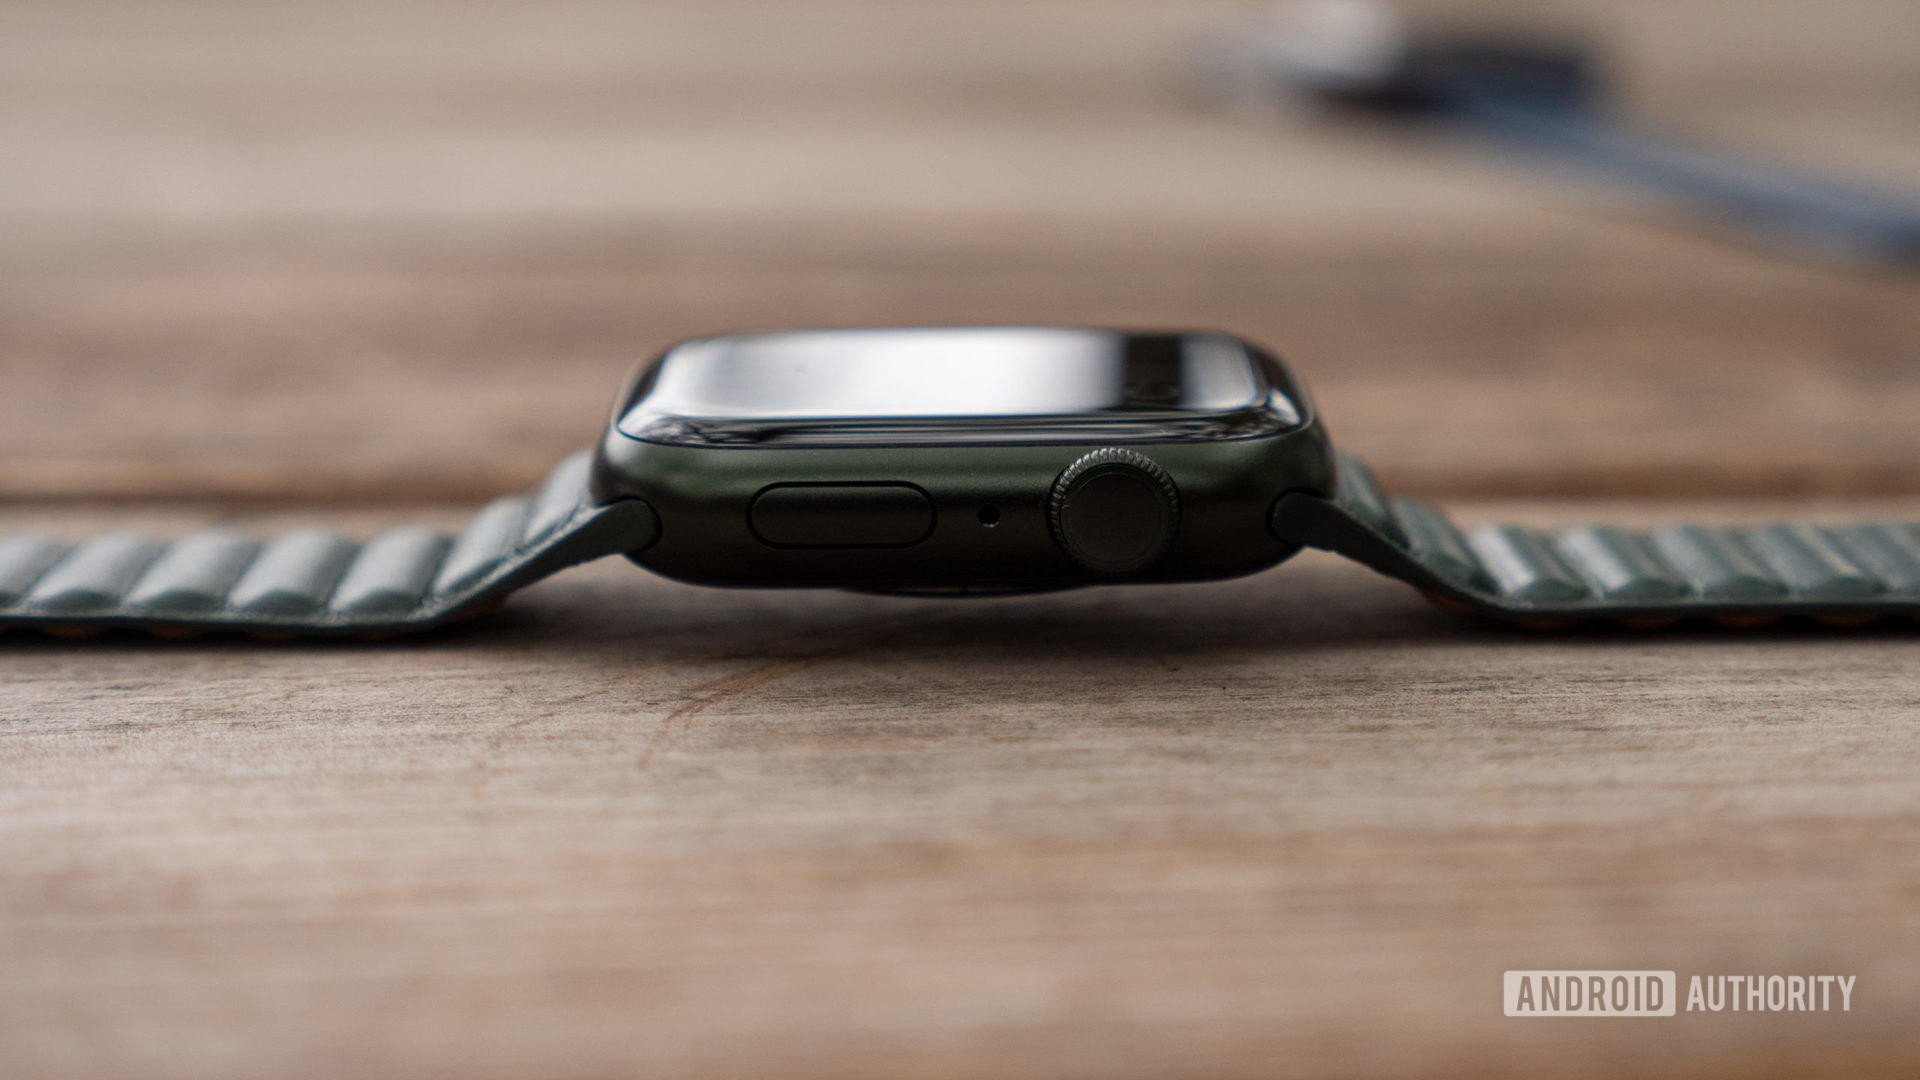 An Apple wearable rests sideways on a table, highlighting its Digital Crown.